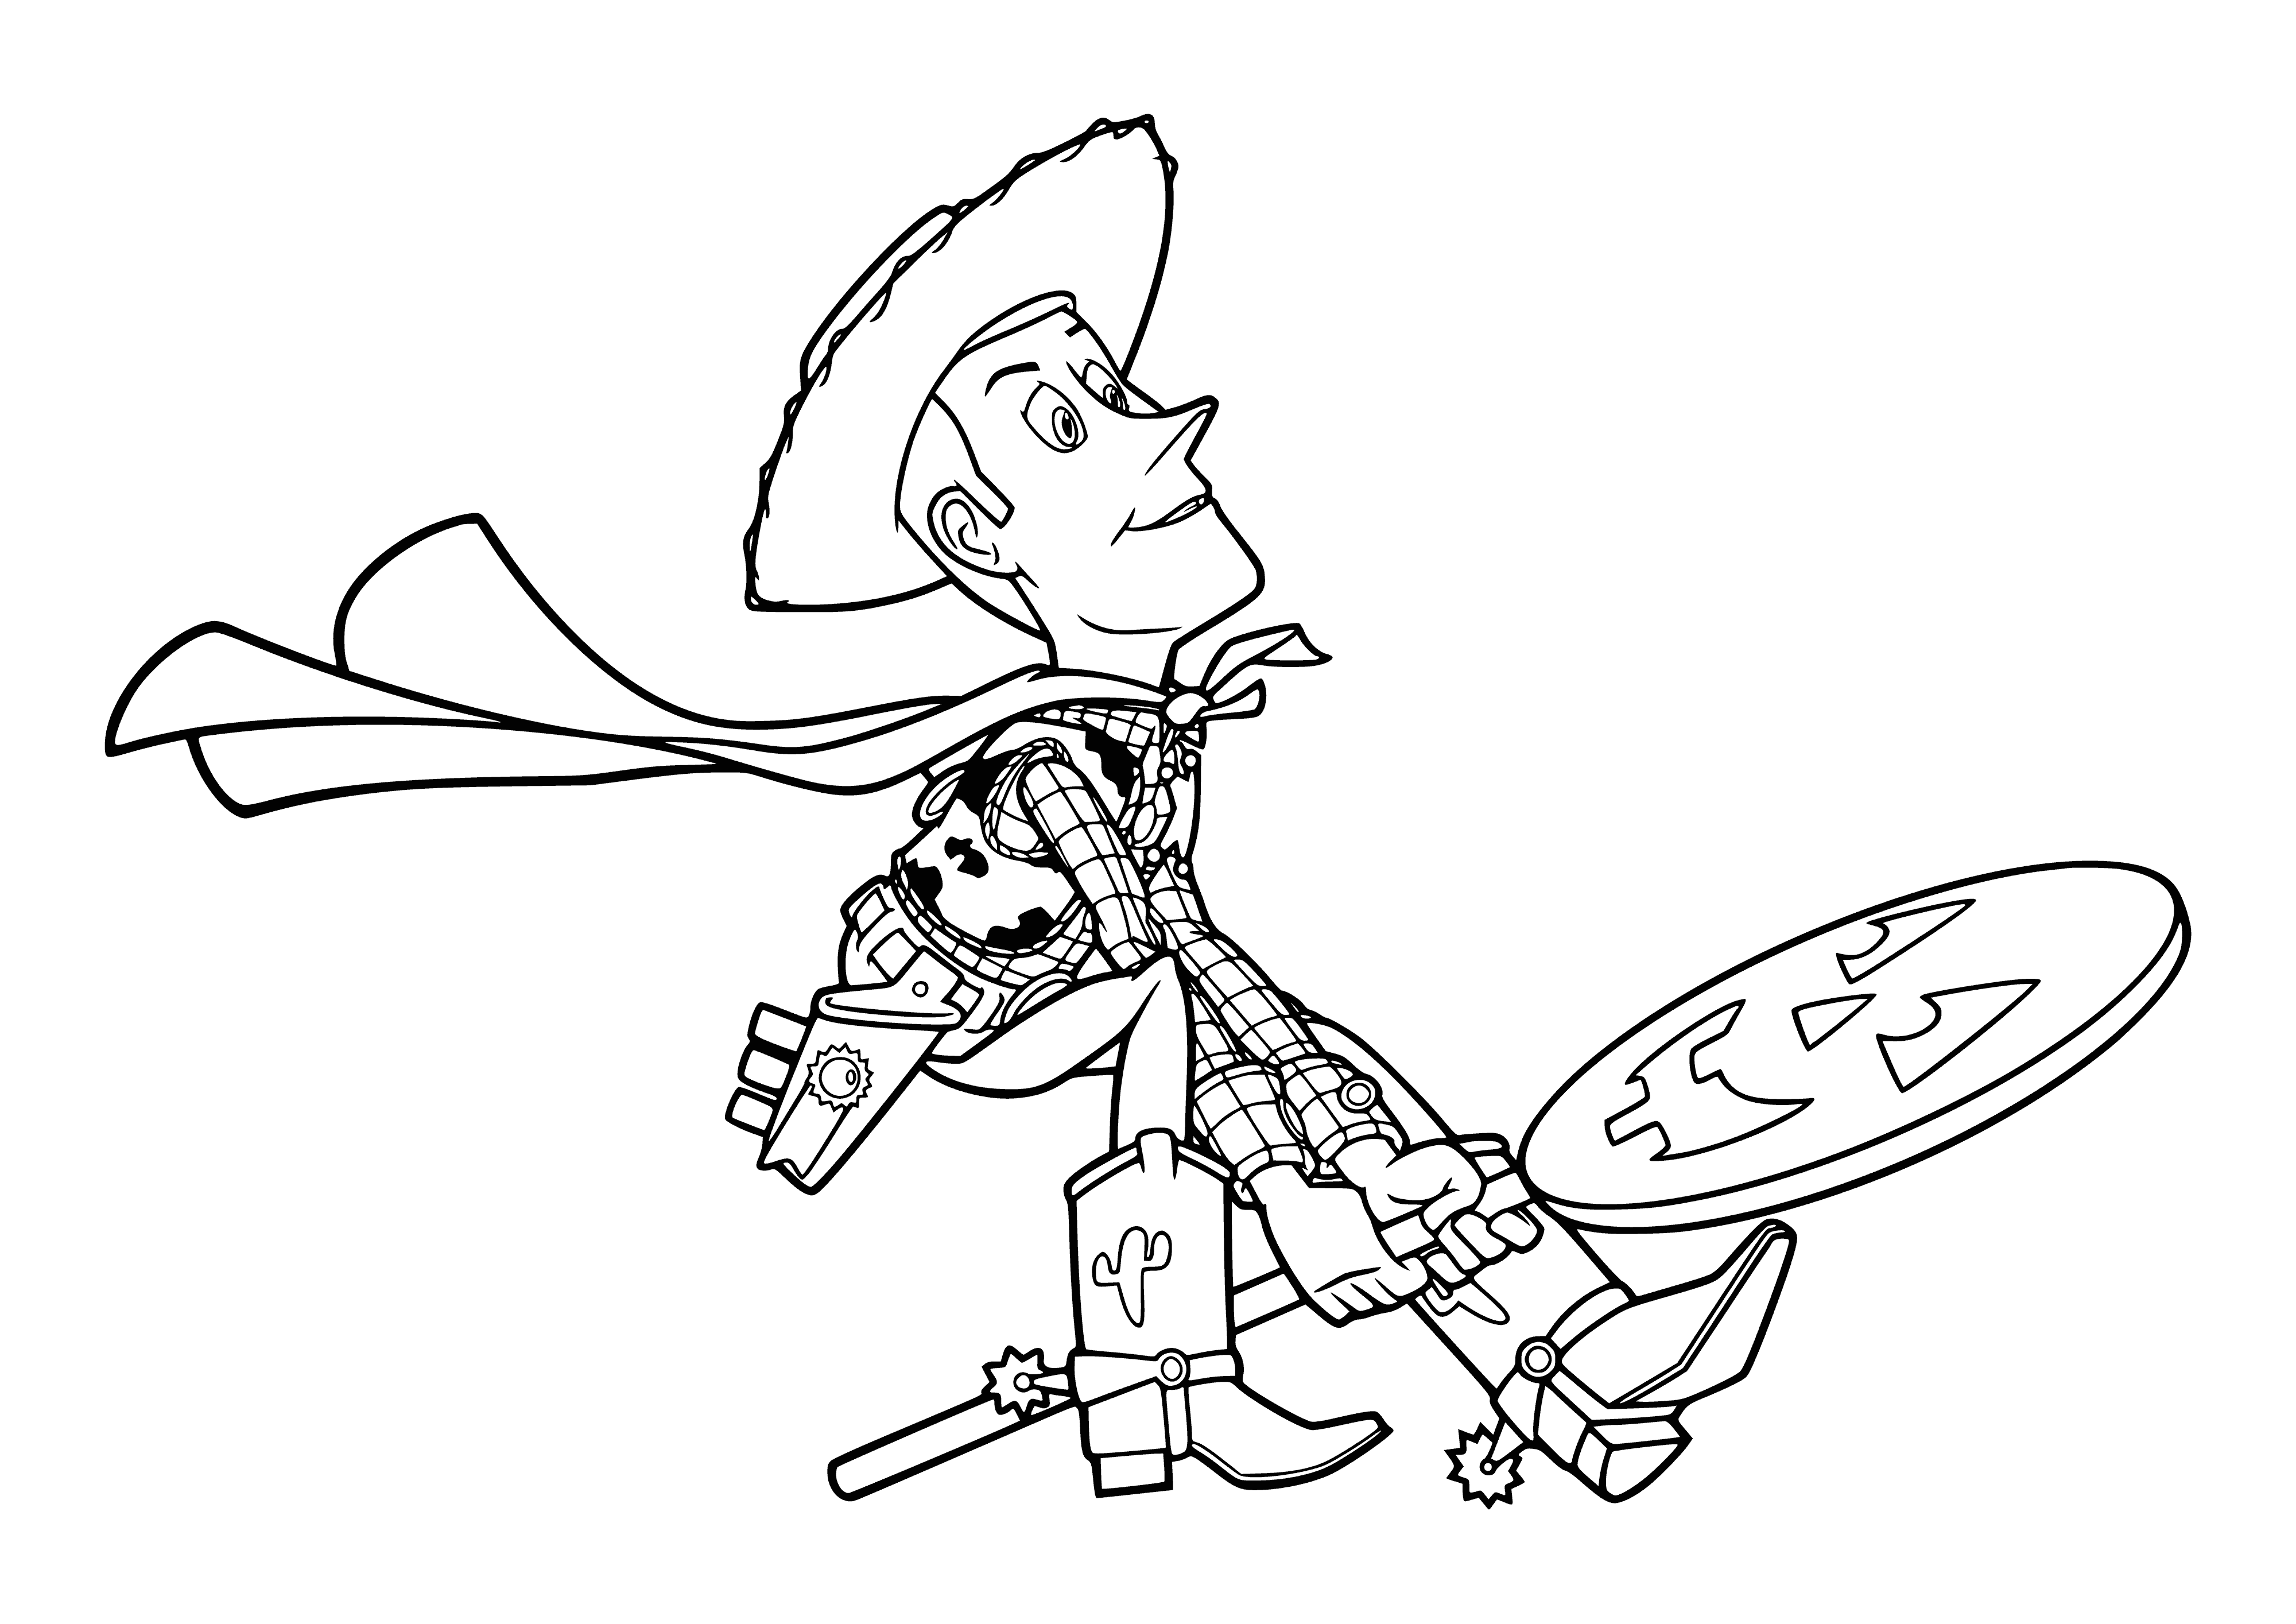 Sheriff Woody rushes to Halloween coloring page